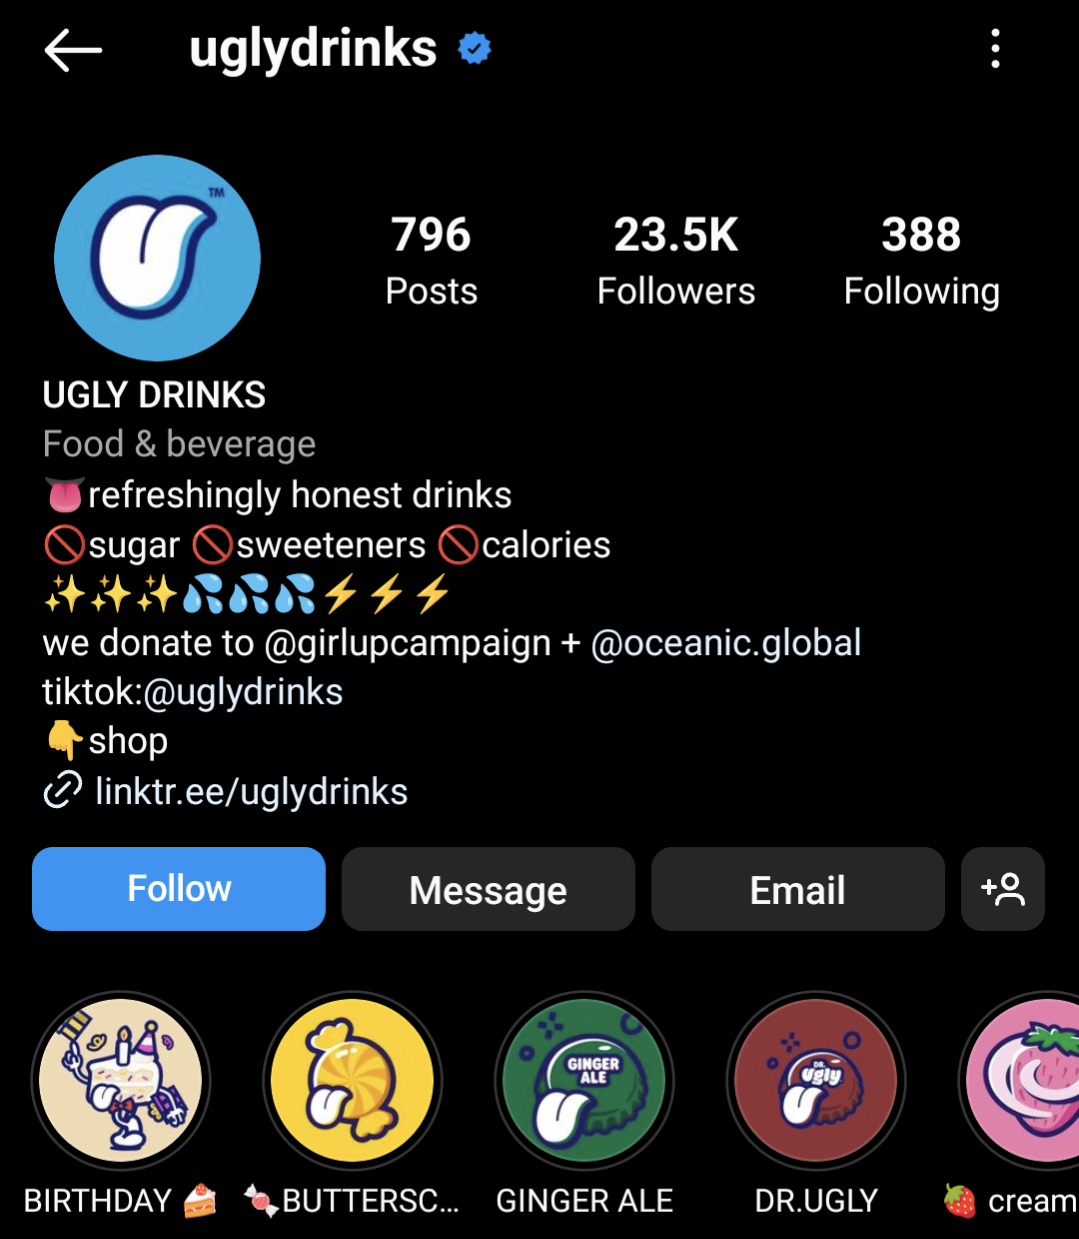 Ugly Drinks uses lists to make its Instagram bio easy to read